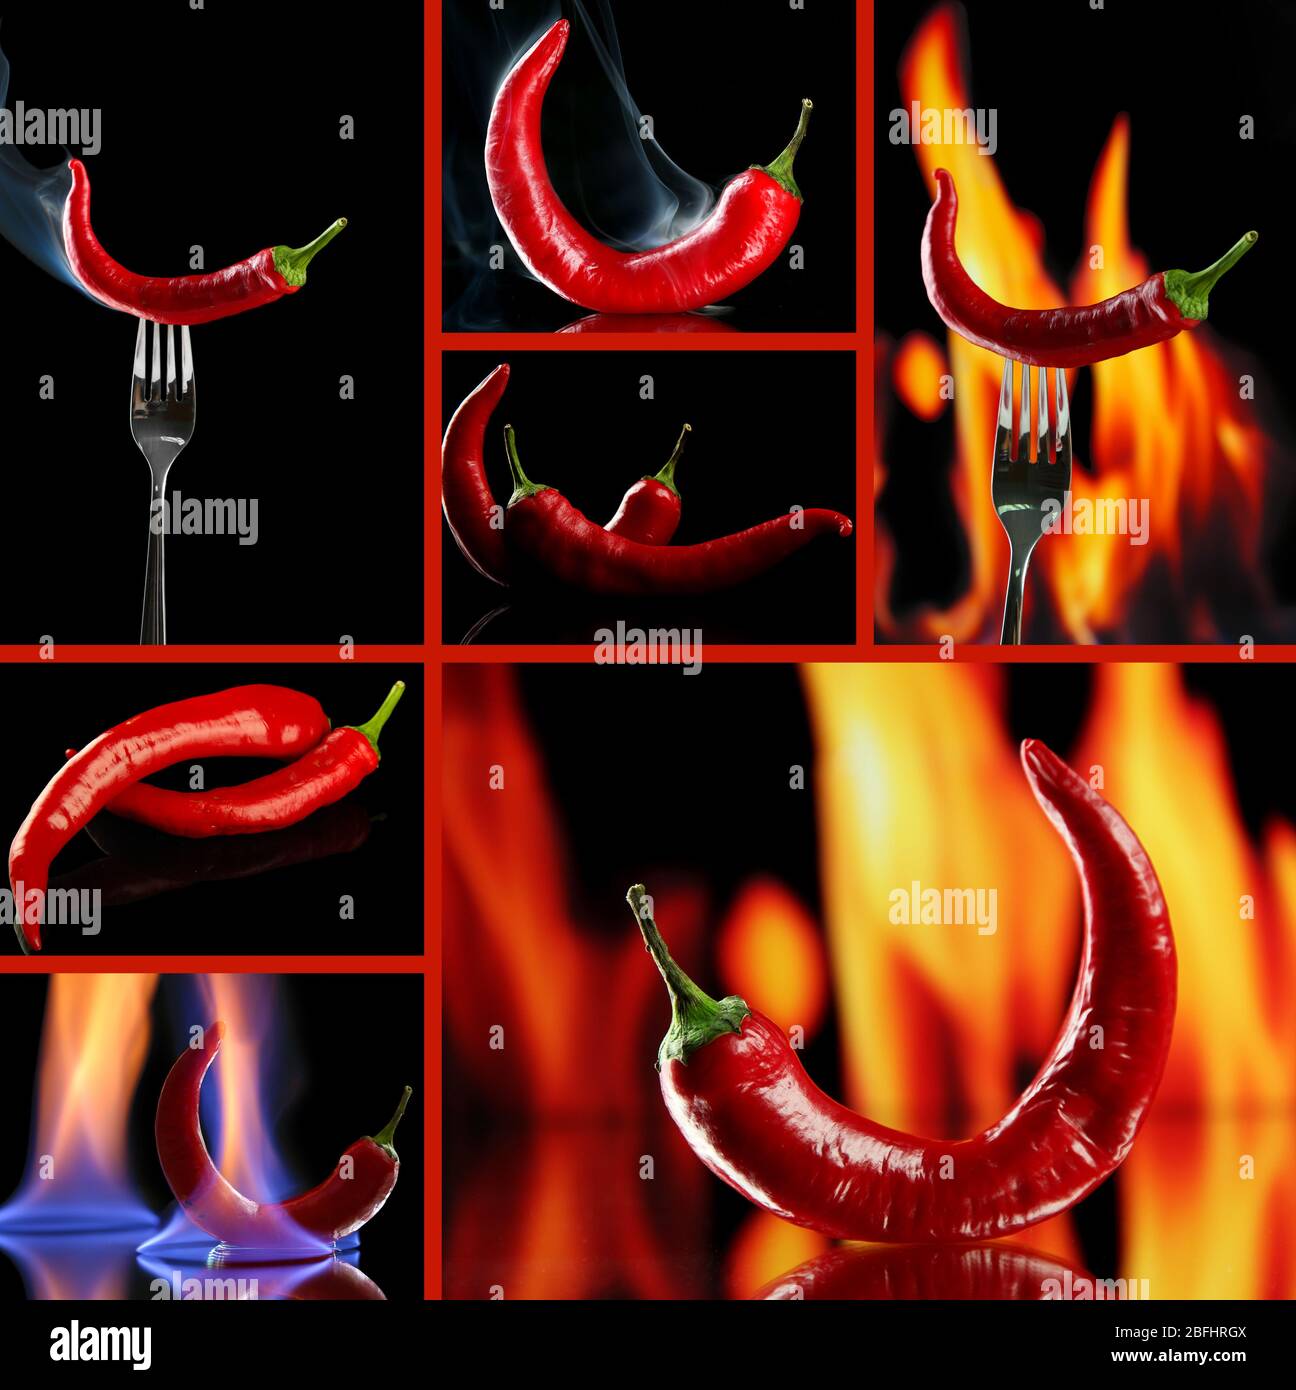 Red hot chili pepper collage Stock Photo